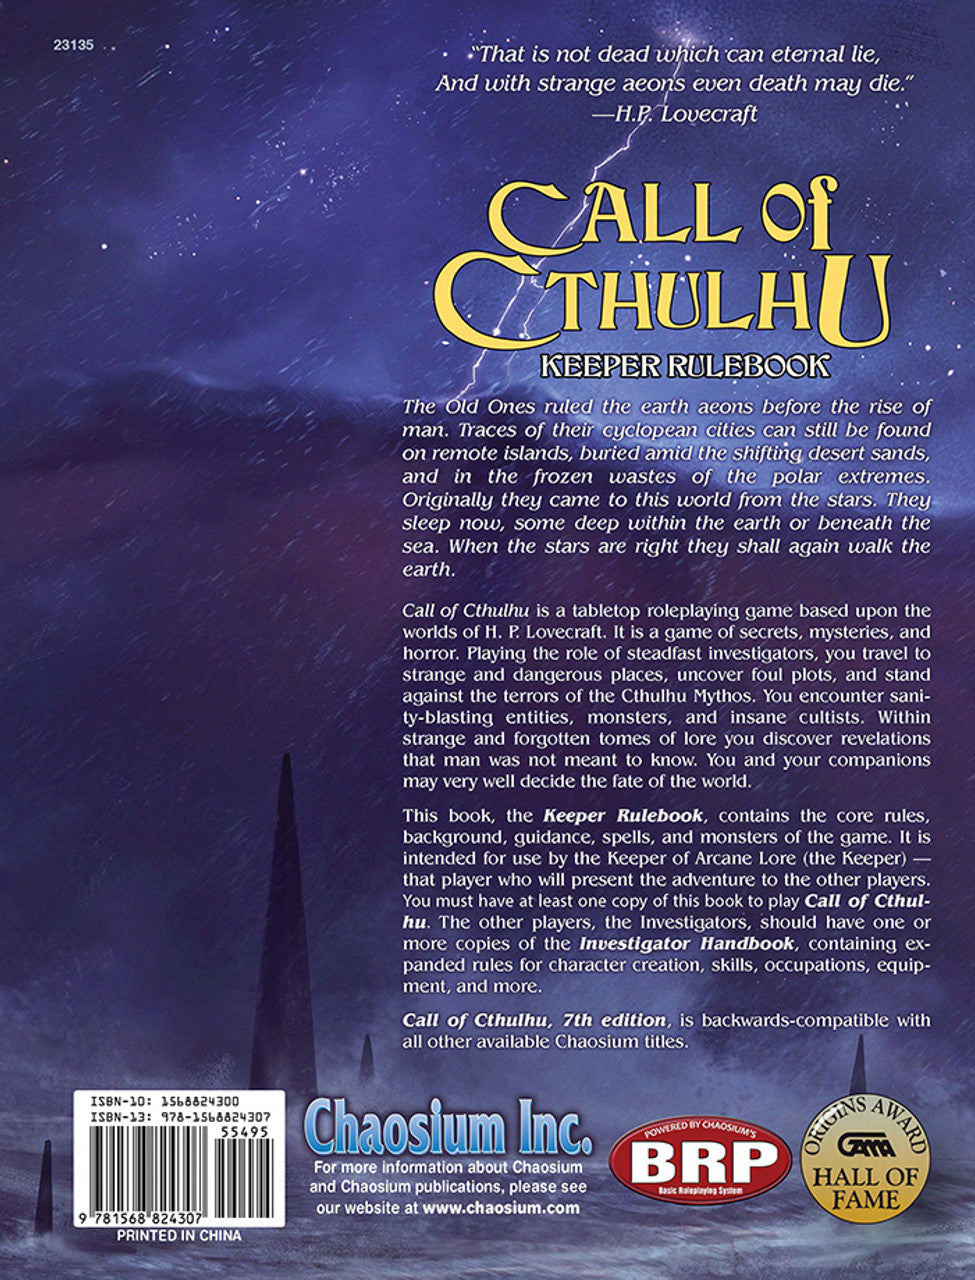 Call of Cthulhu: 7th Edition Hardcover Keeper Rulebook RPG Chaosium 